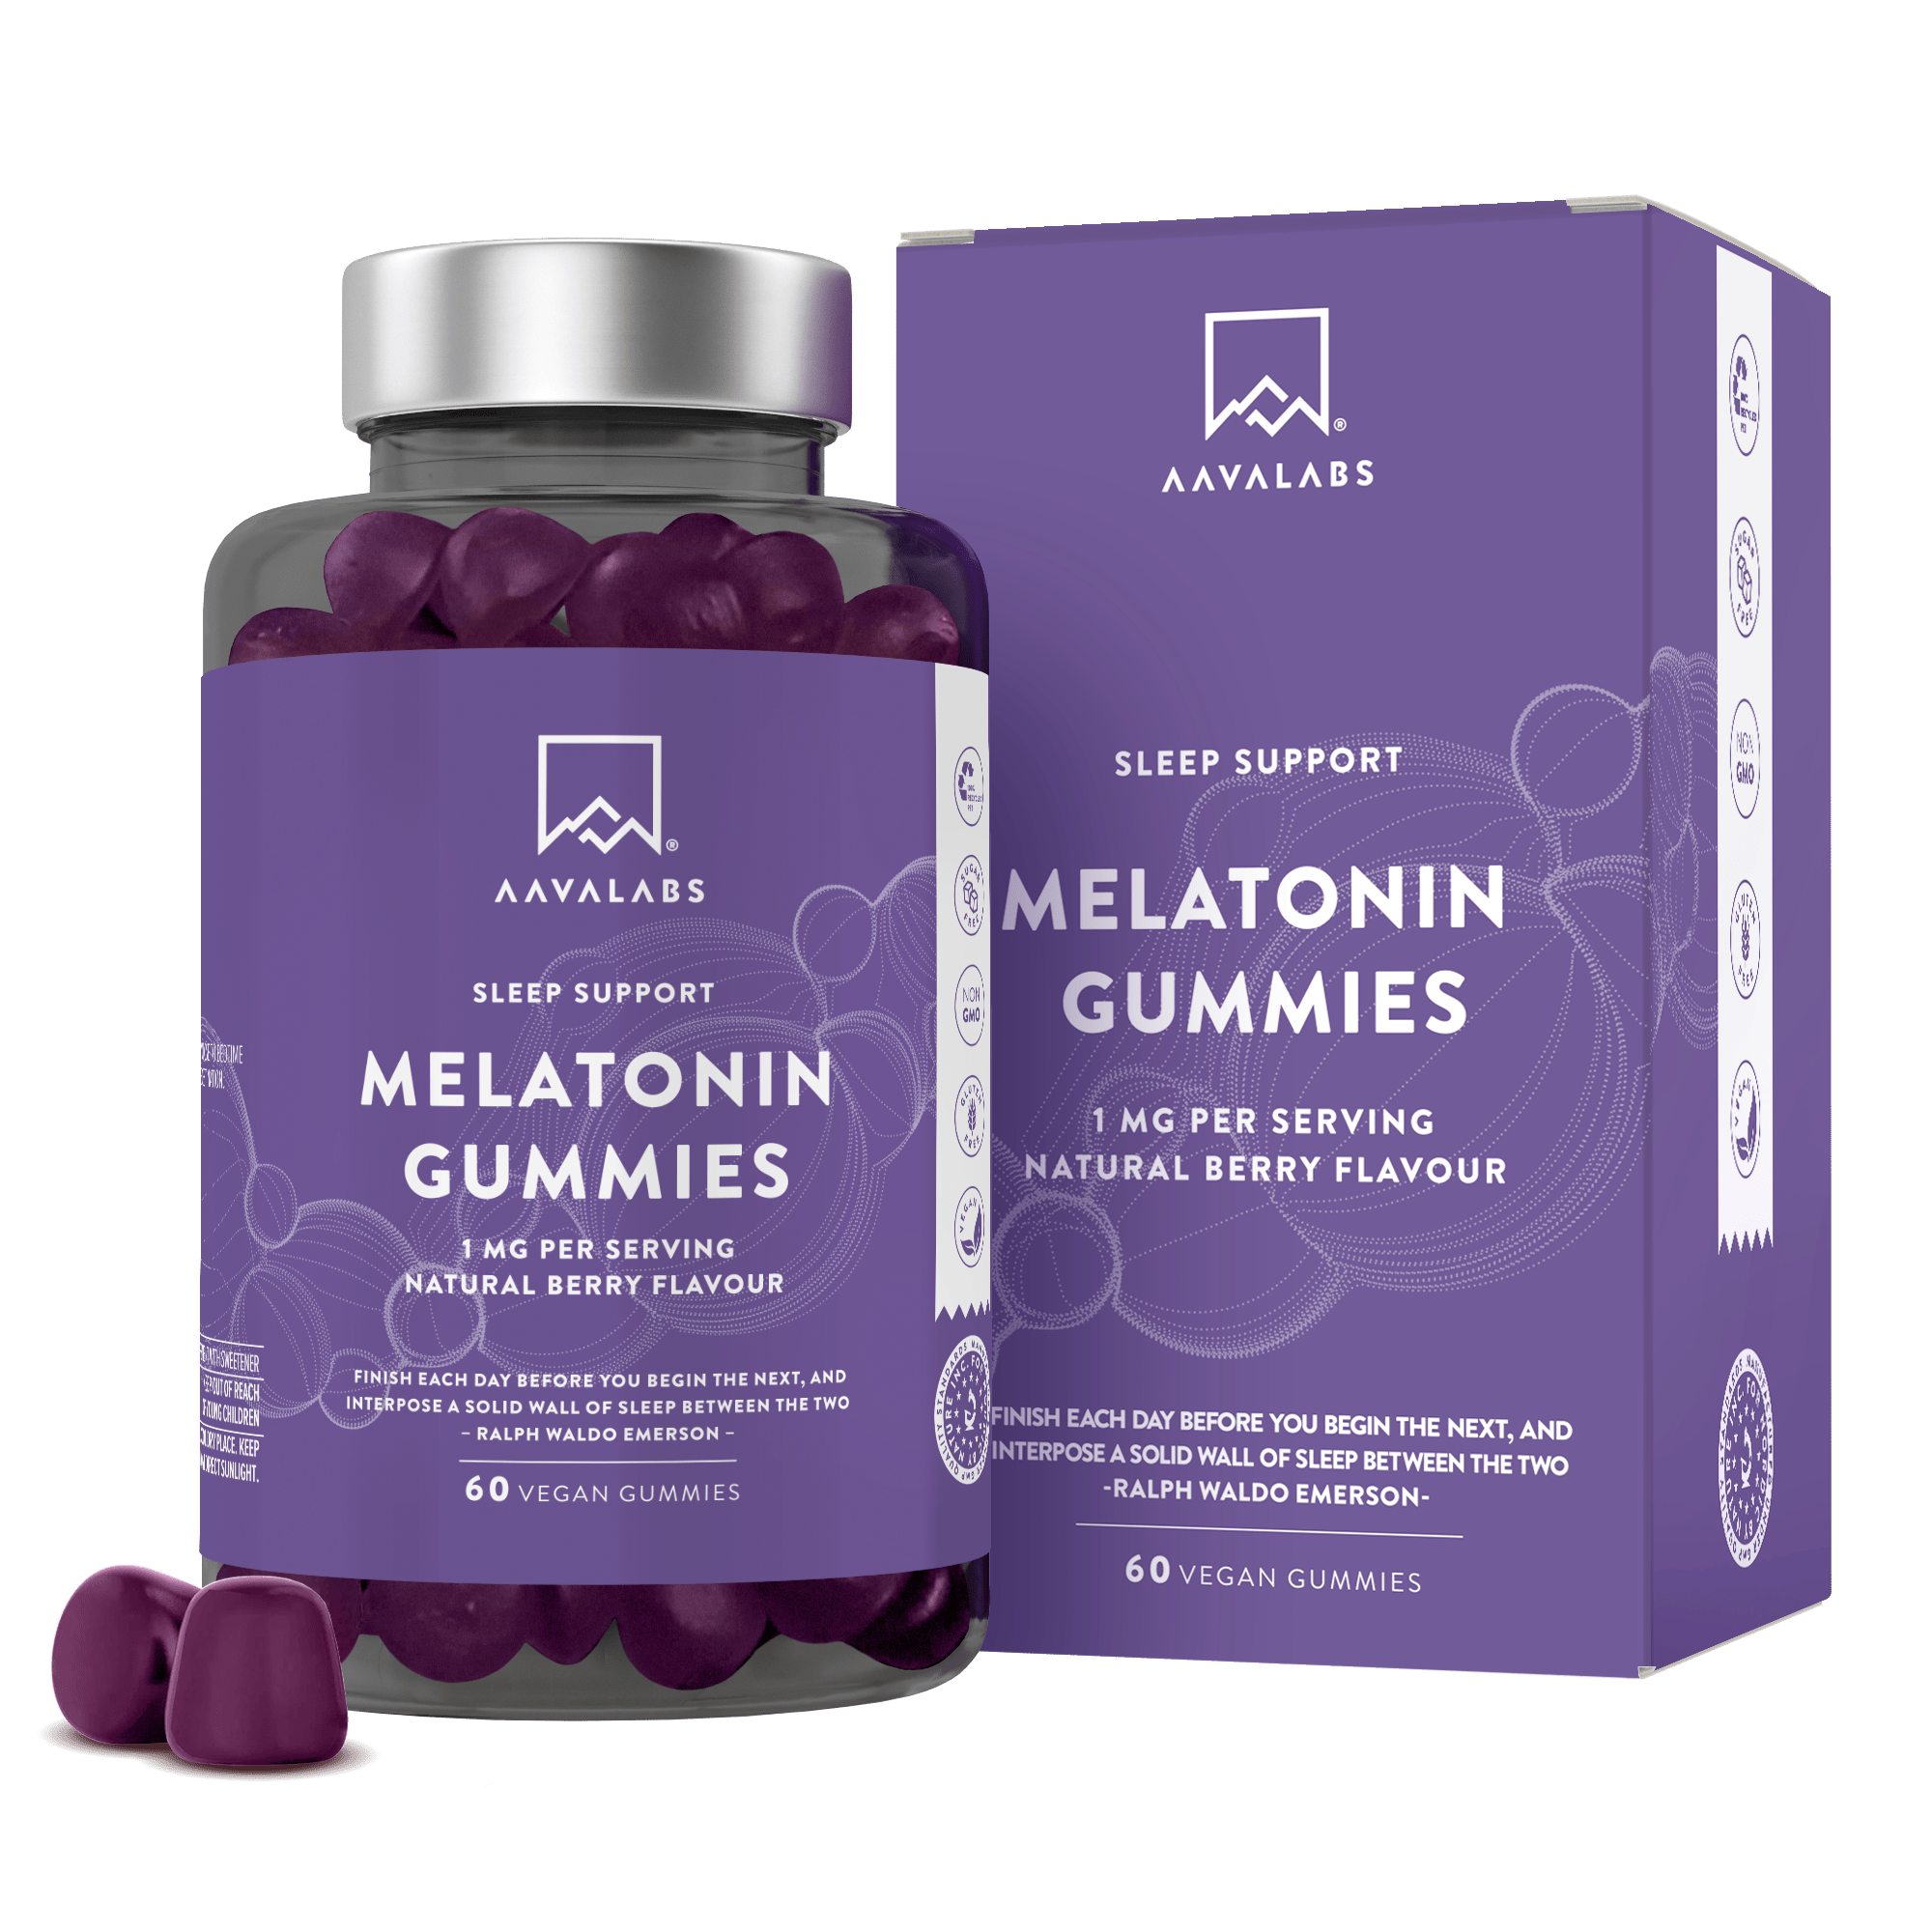 Bottle and box of Aavalabs Melatonin Gummies for sleep support - AAVALABS